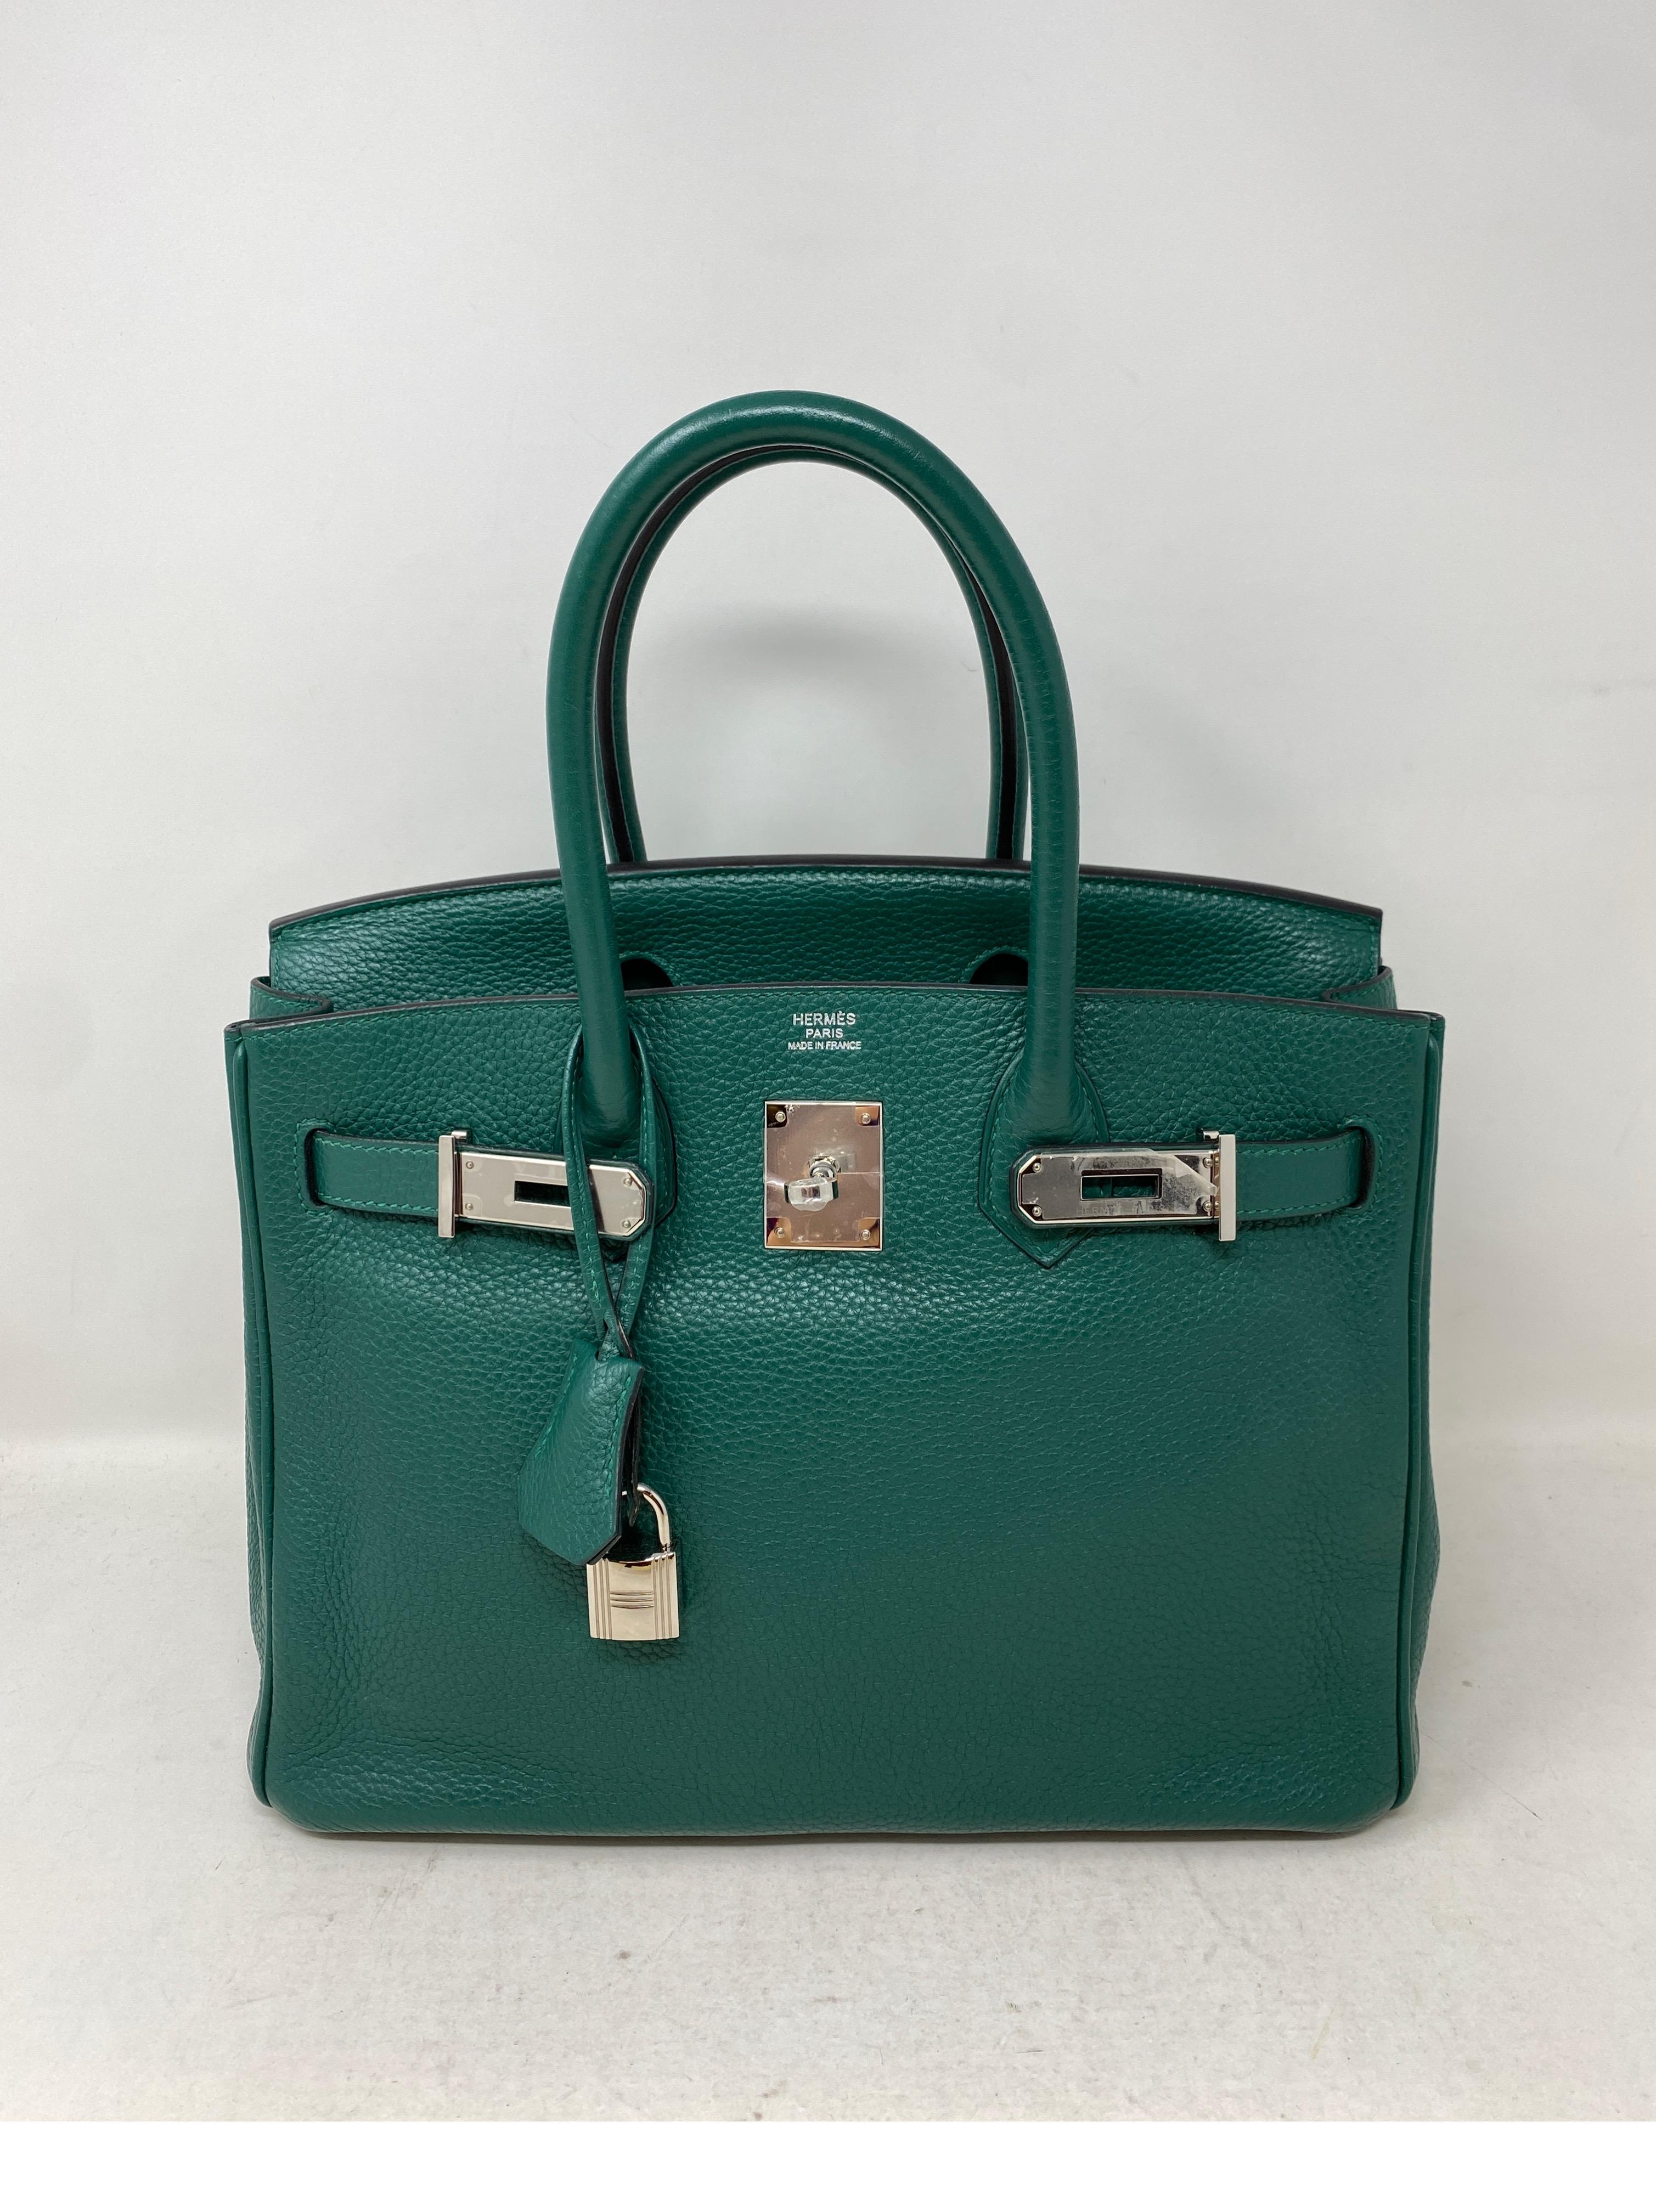 Hermes Malachite Birkin 30 Bag. Palladium hardware. Good condition. Nice neutral green color Malachite. Clemence leather. Most wanted size 30. Includes clochette, lock, keys, and dust bag. Guaranteed authentic. 